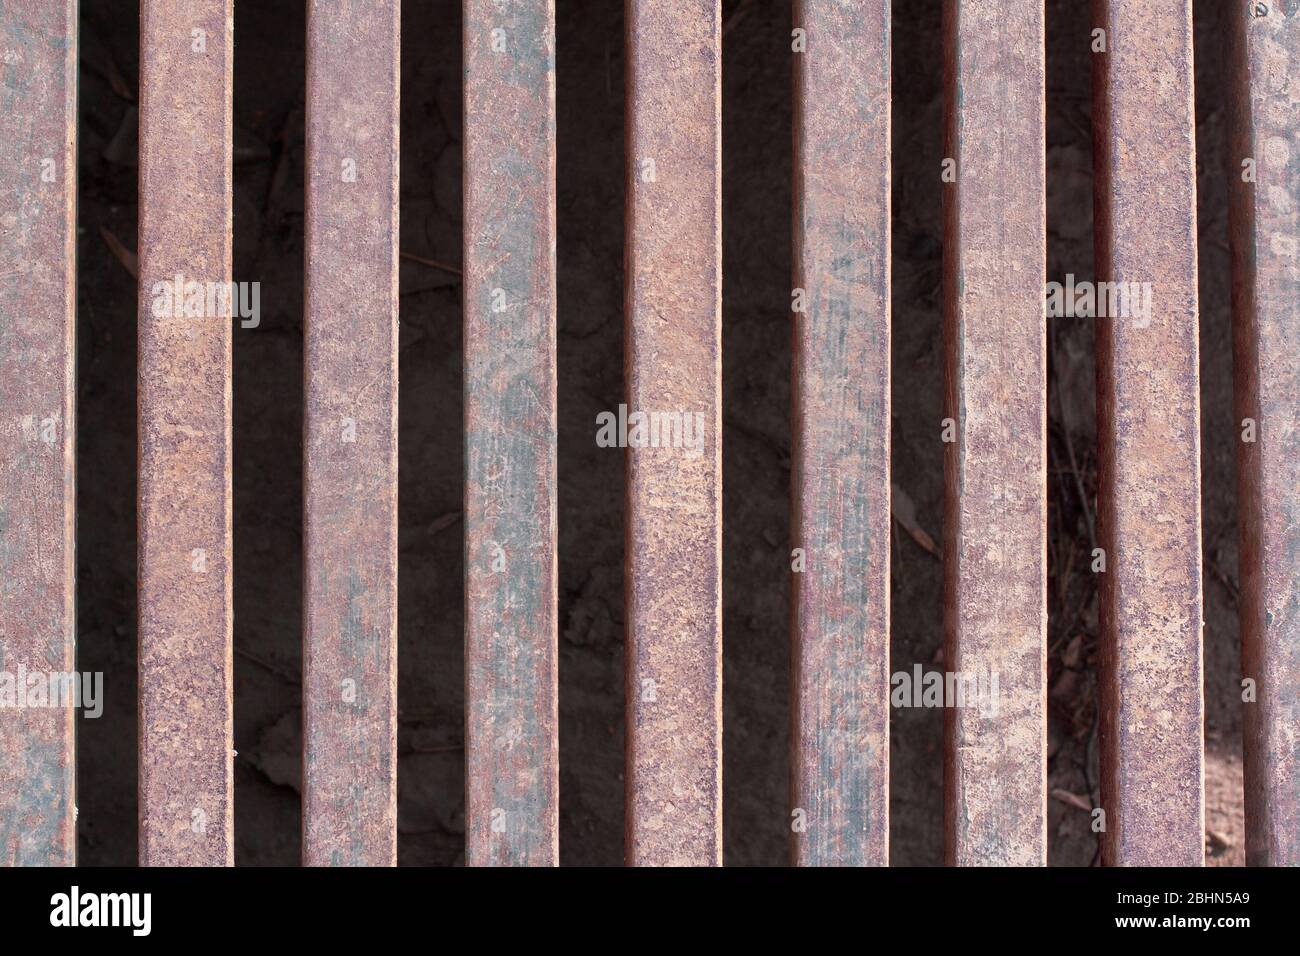 Iron grate over the drainage channel on the road. Rusty texture and scuffs on the metal. Horizontal. Stock Photo